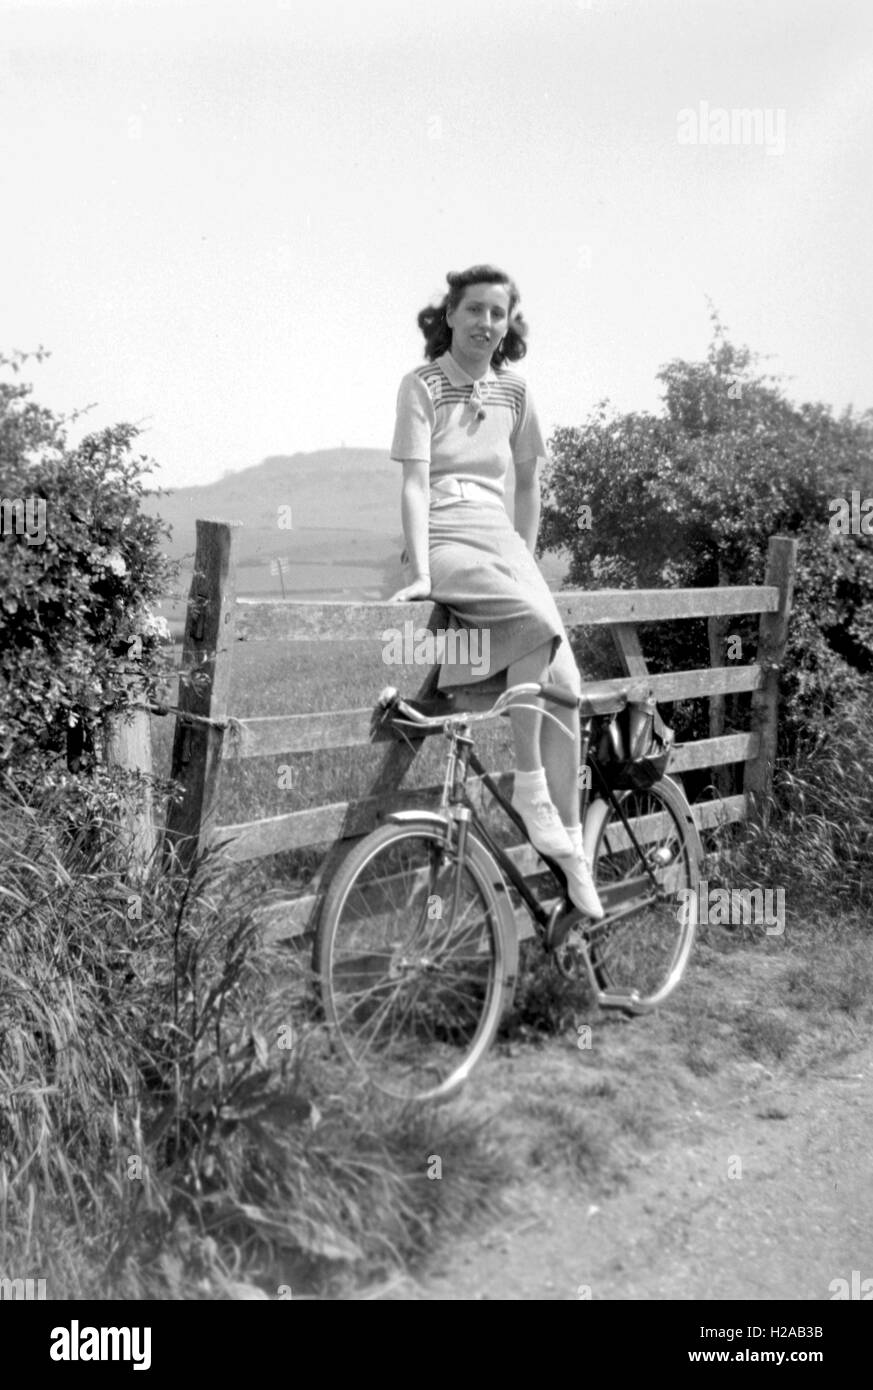 A young woman poses on a gate with her bicycle c1935. A lovely pose dressed in stylish knitted fashion with nice even lighting. Photo by Tony Henshaw Stock Photo